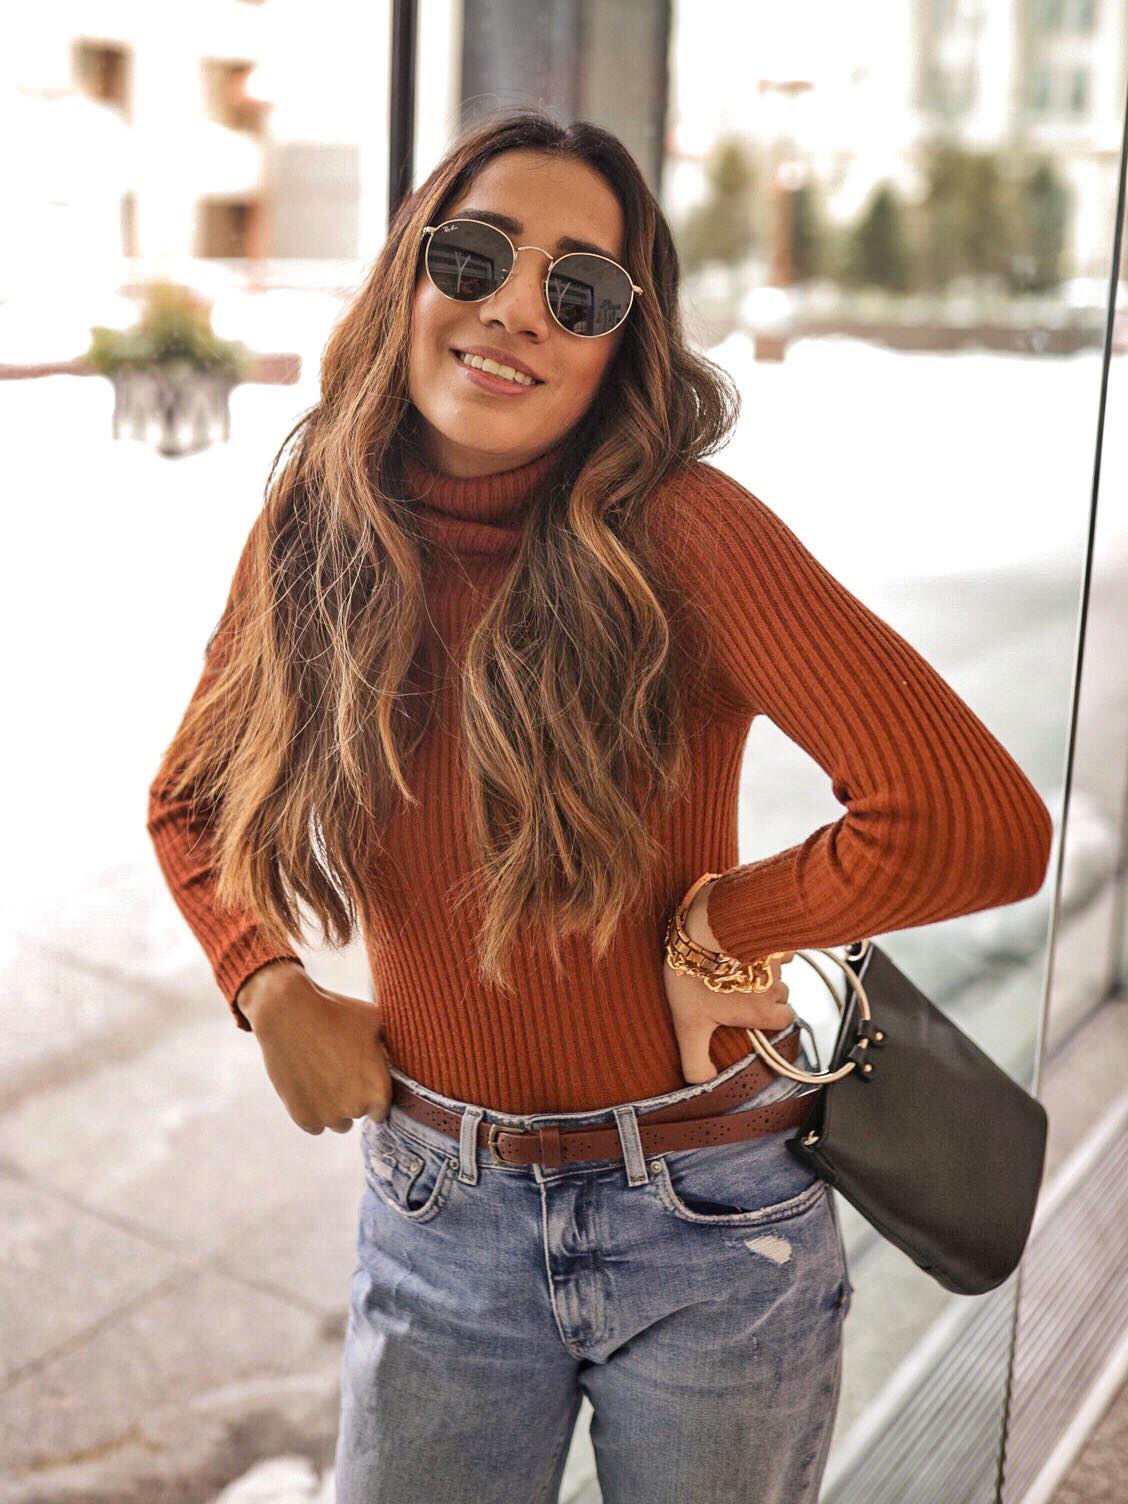 Street style boyfriend jeans Toronto fashion week ootd hm jeans asos boots faiza inam sincerely humble 6